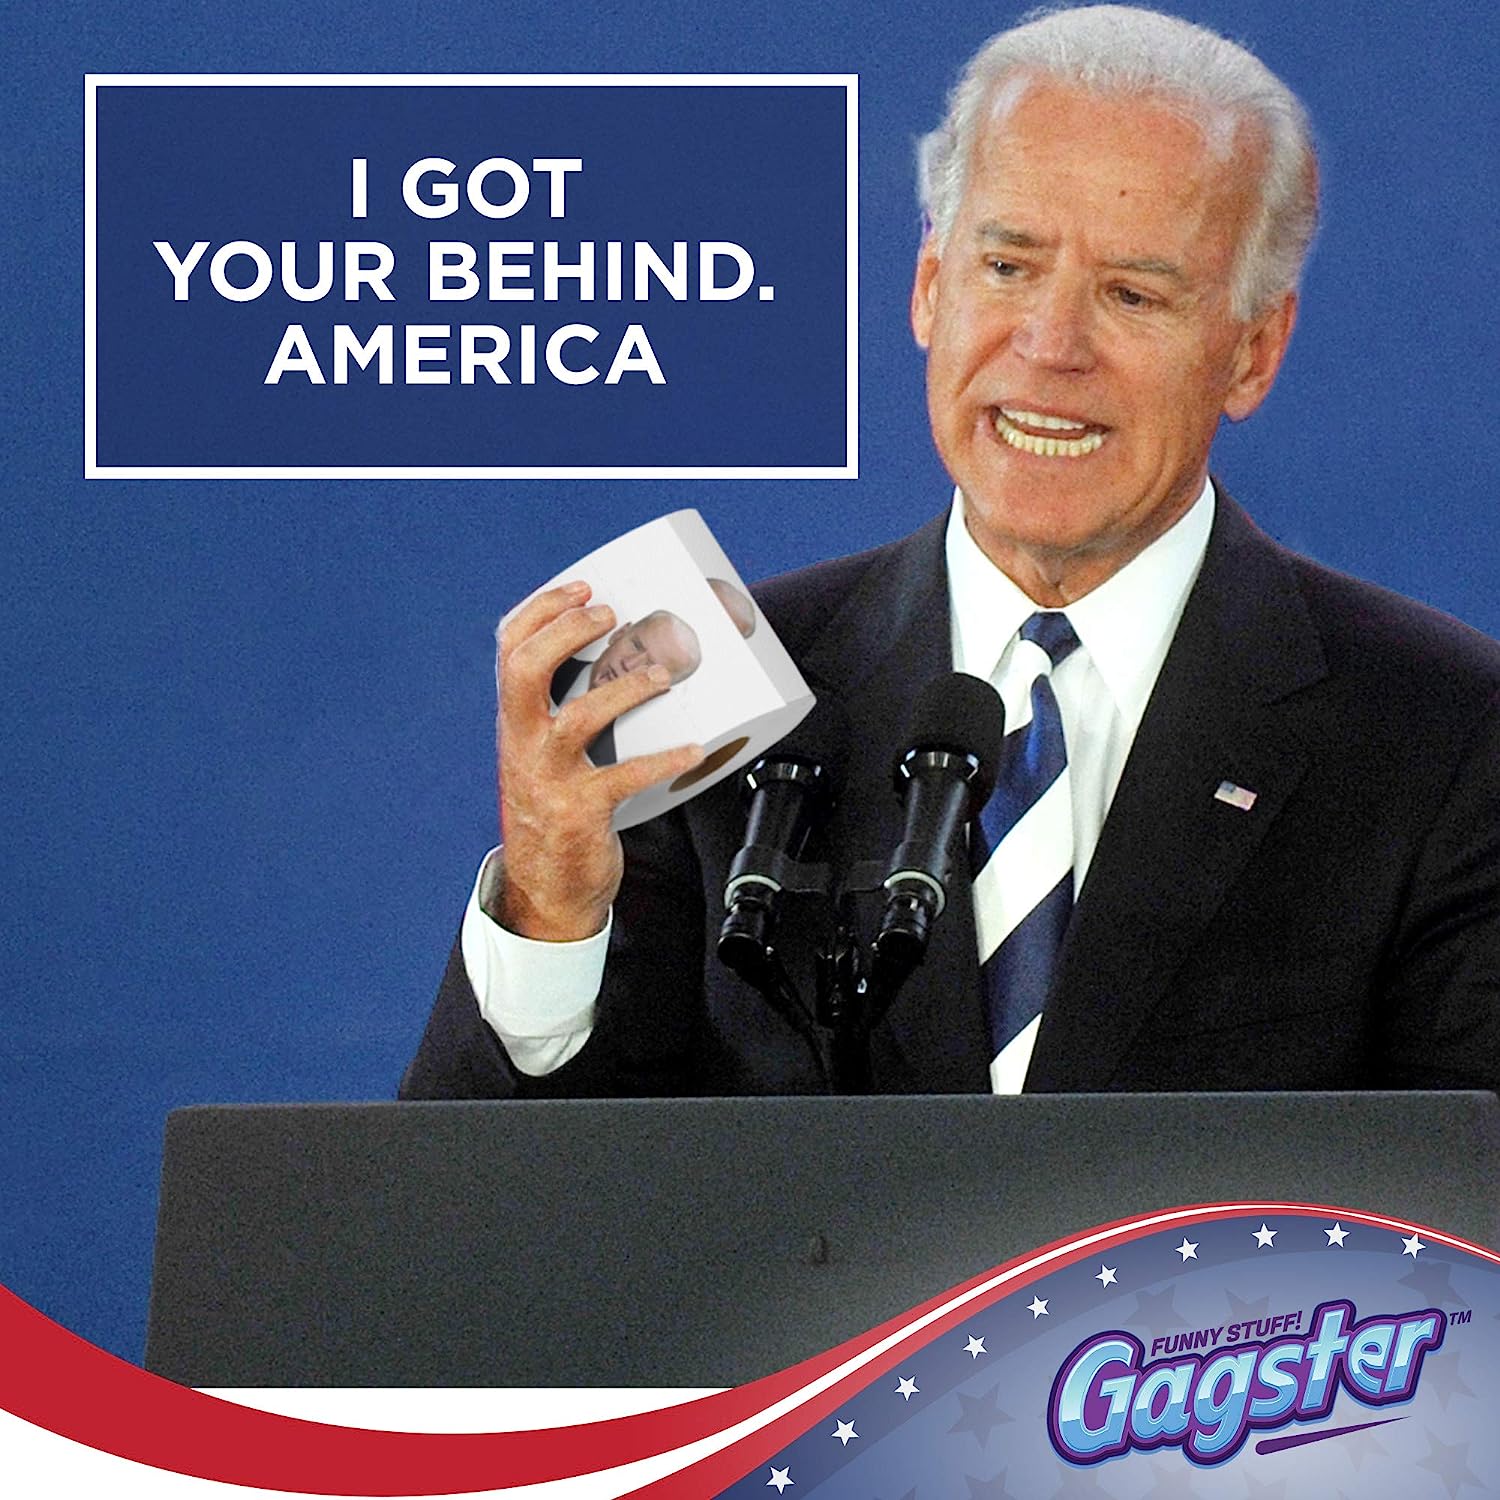 Joe Biden is standing at a podium with a roll of toilet paper photoshopped into his hand. The text reads "I got your behind America."